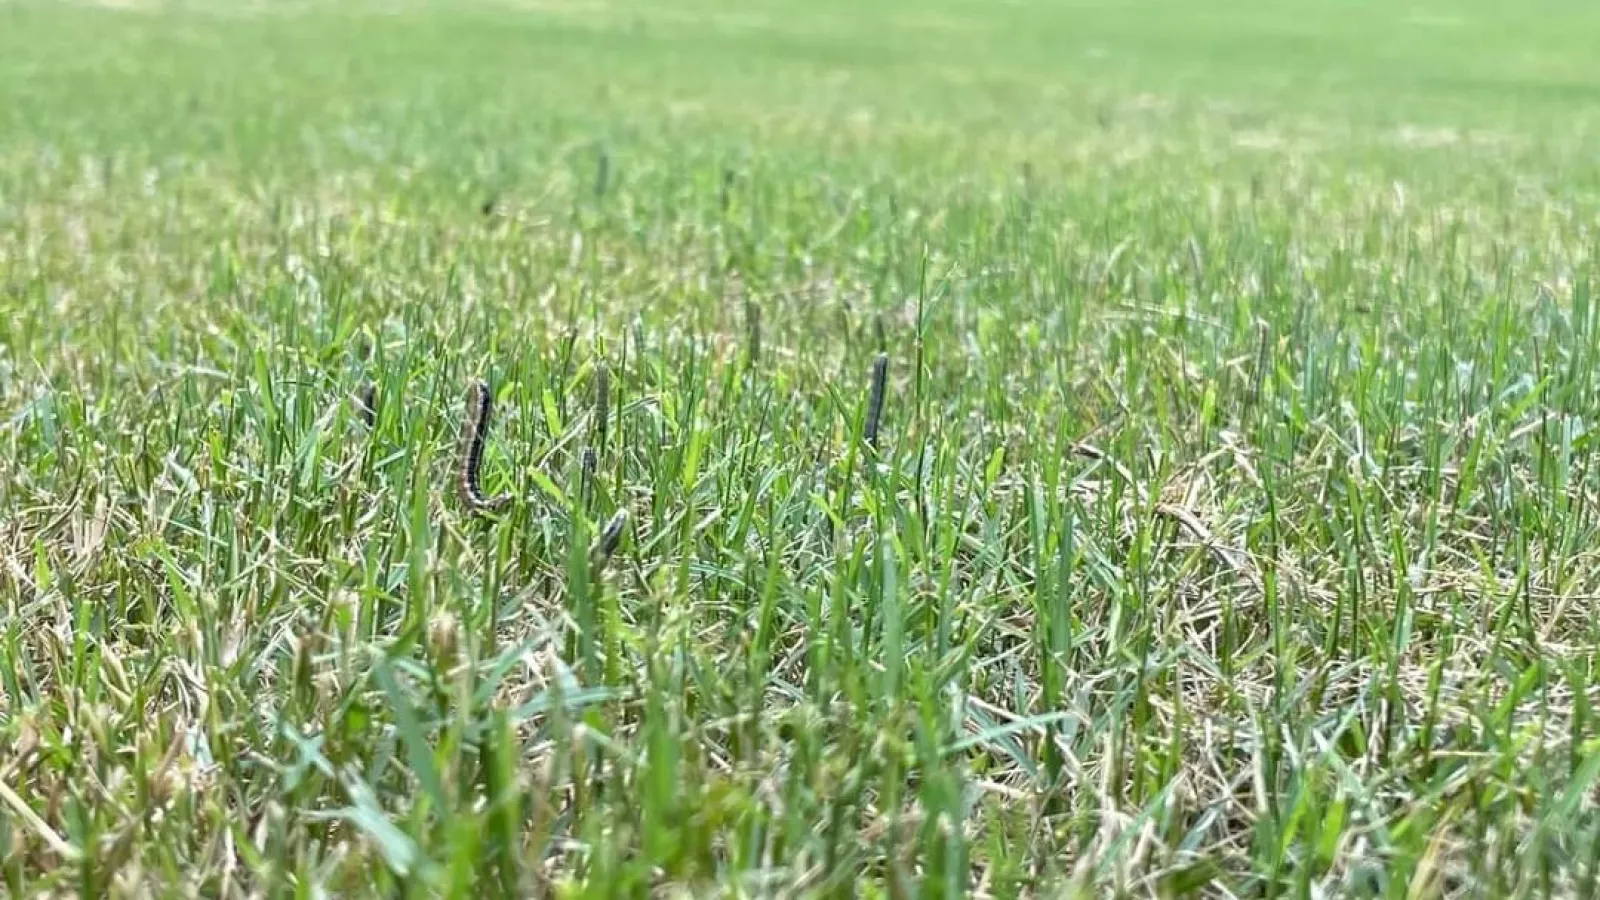 Armyworms at attention on grass blades